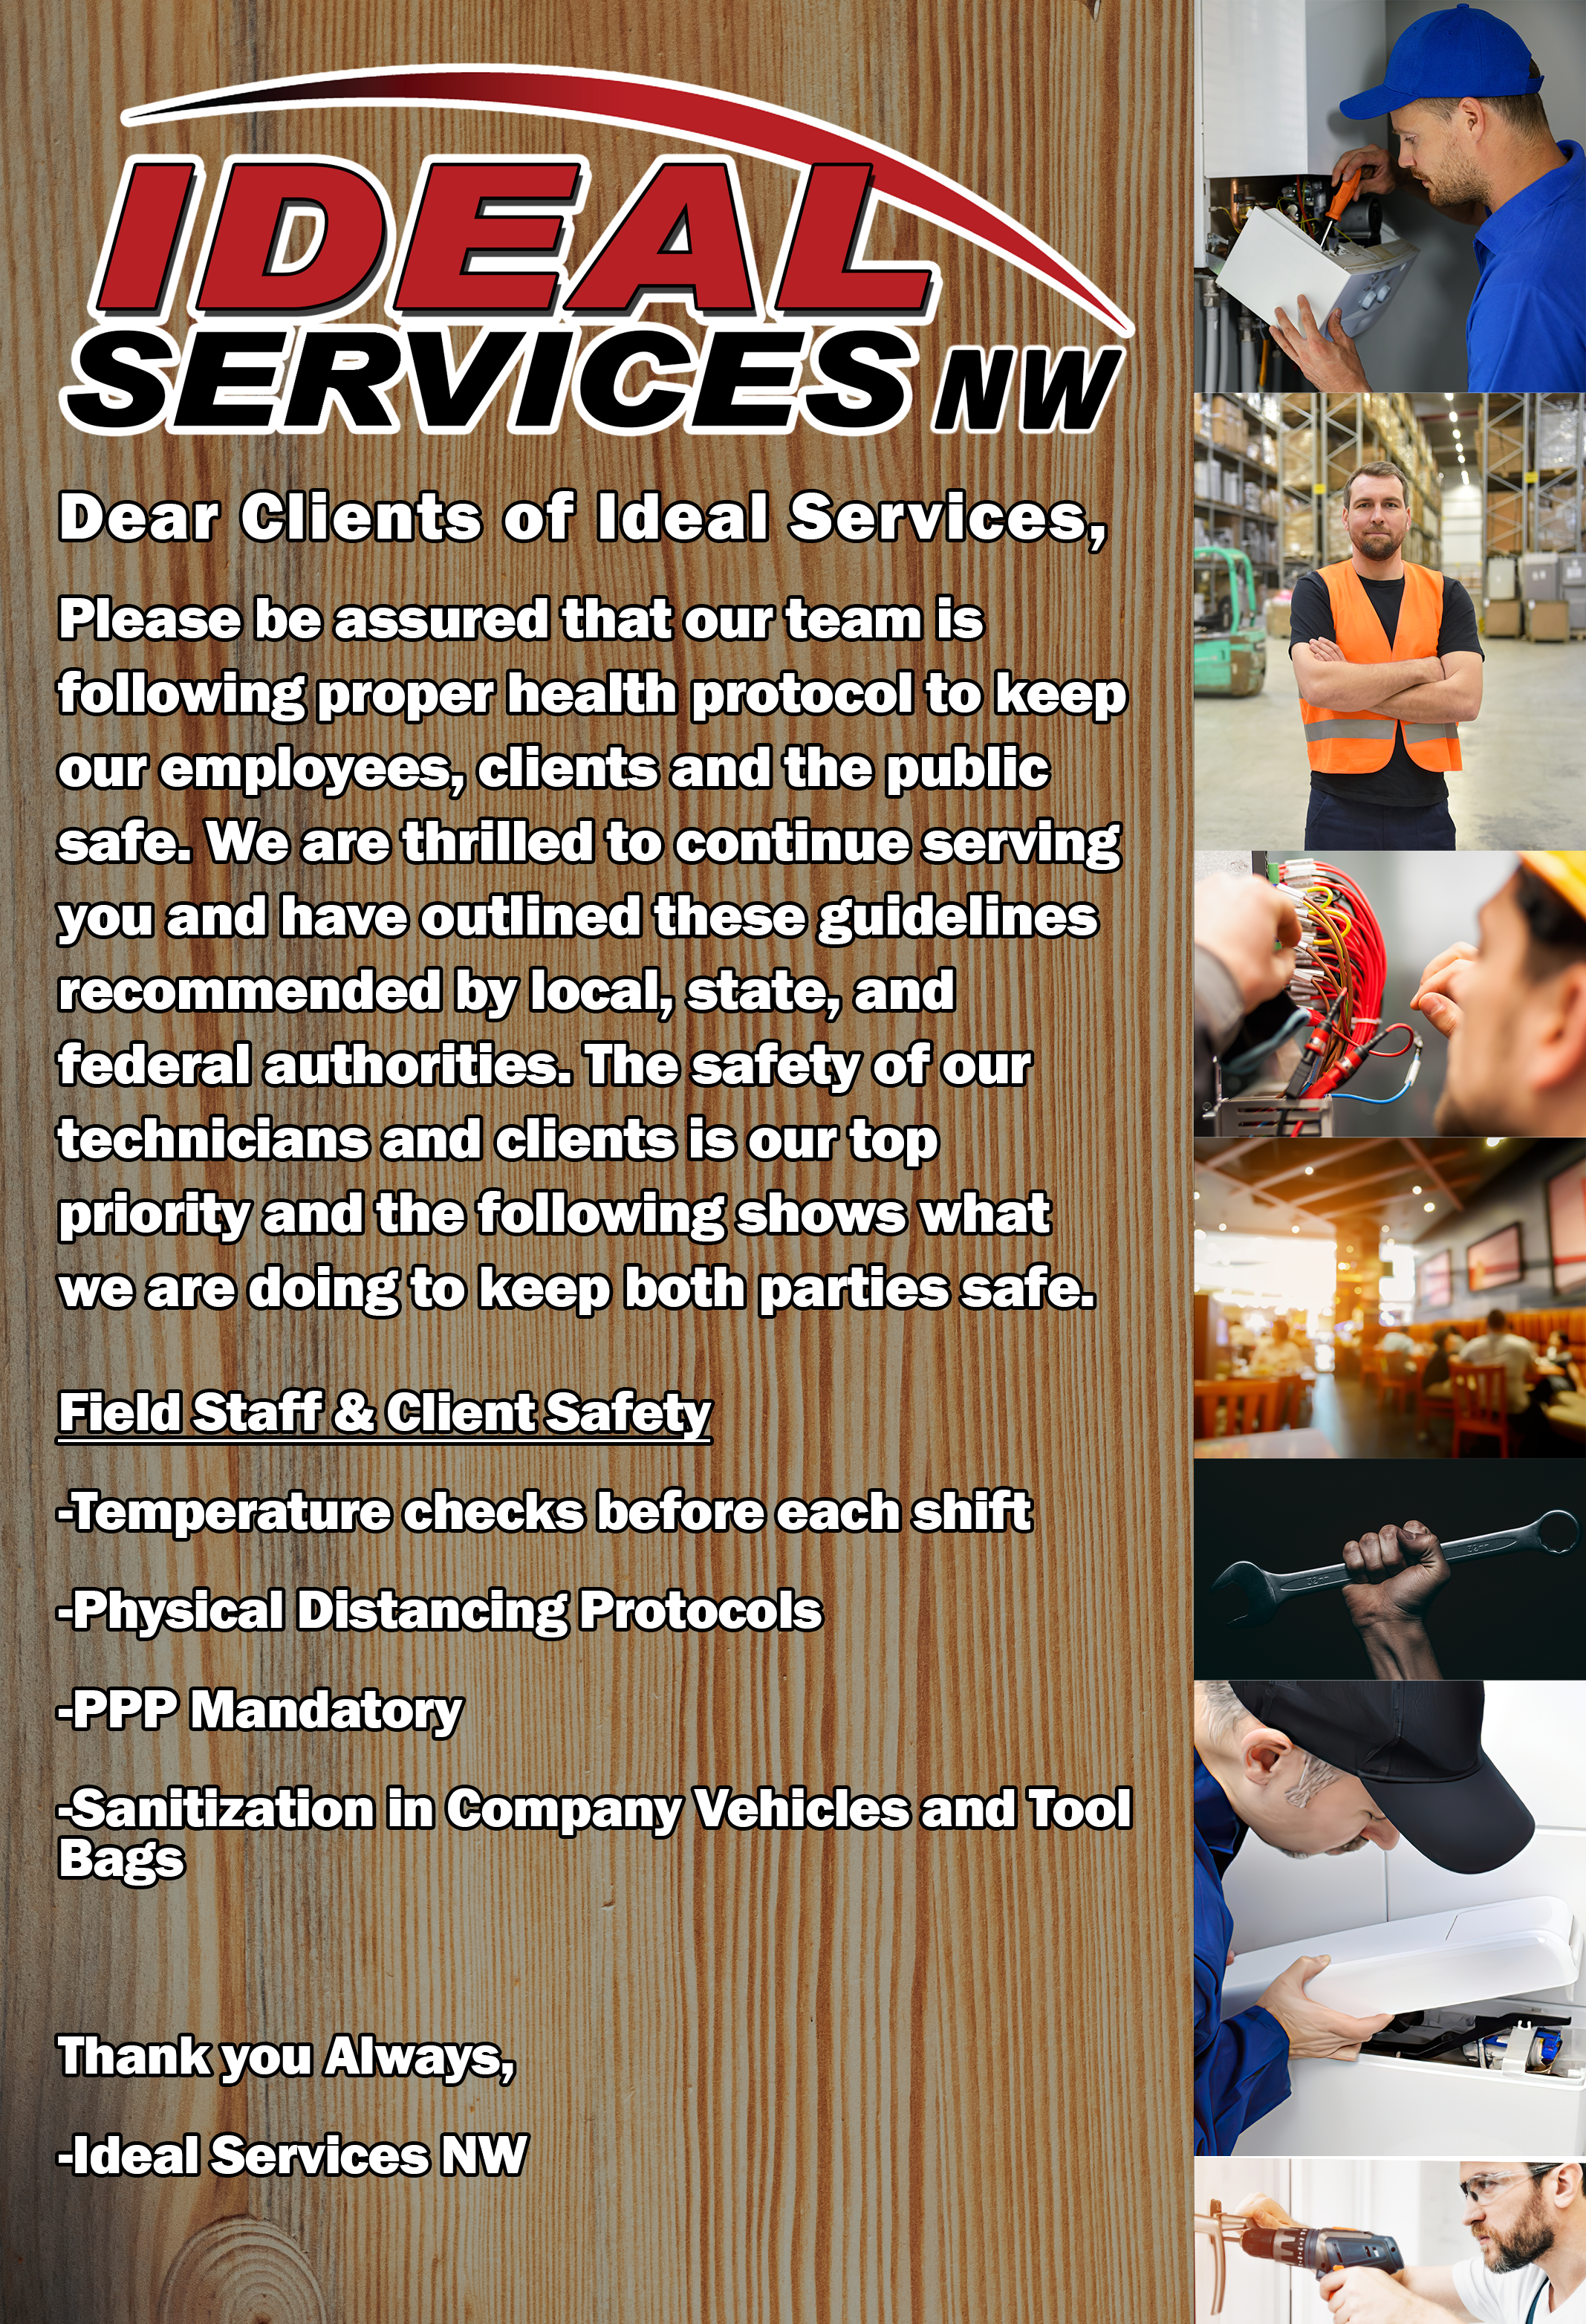 Ideal Services Seattle and Portland Plumber, electrician, and handyman available for work!